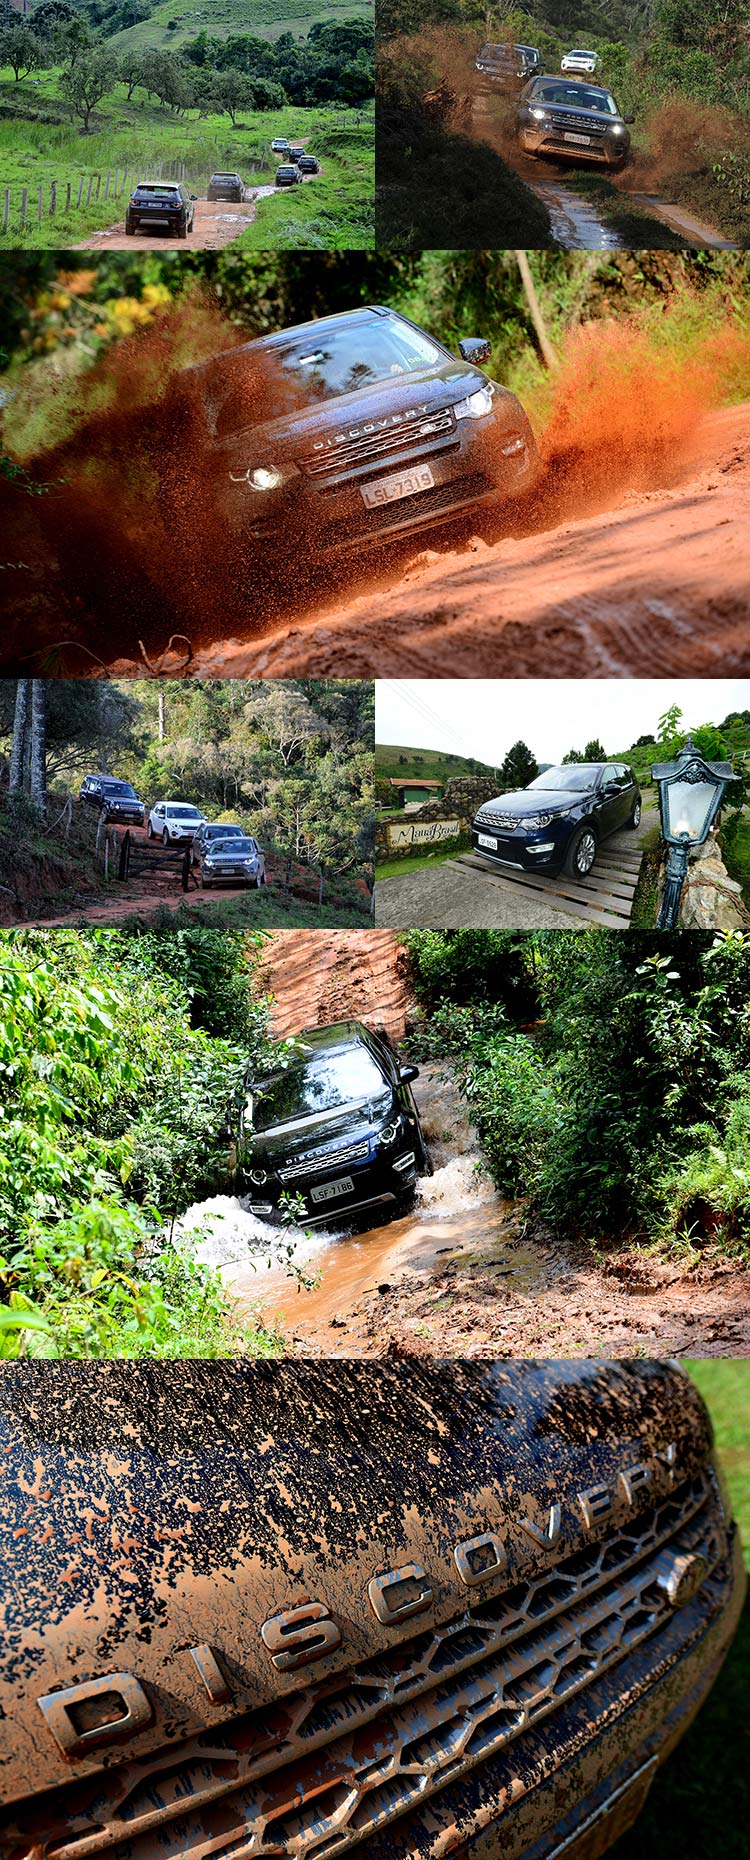 expedicao-discovery-sport-landrover